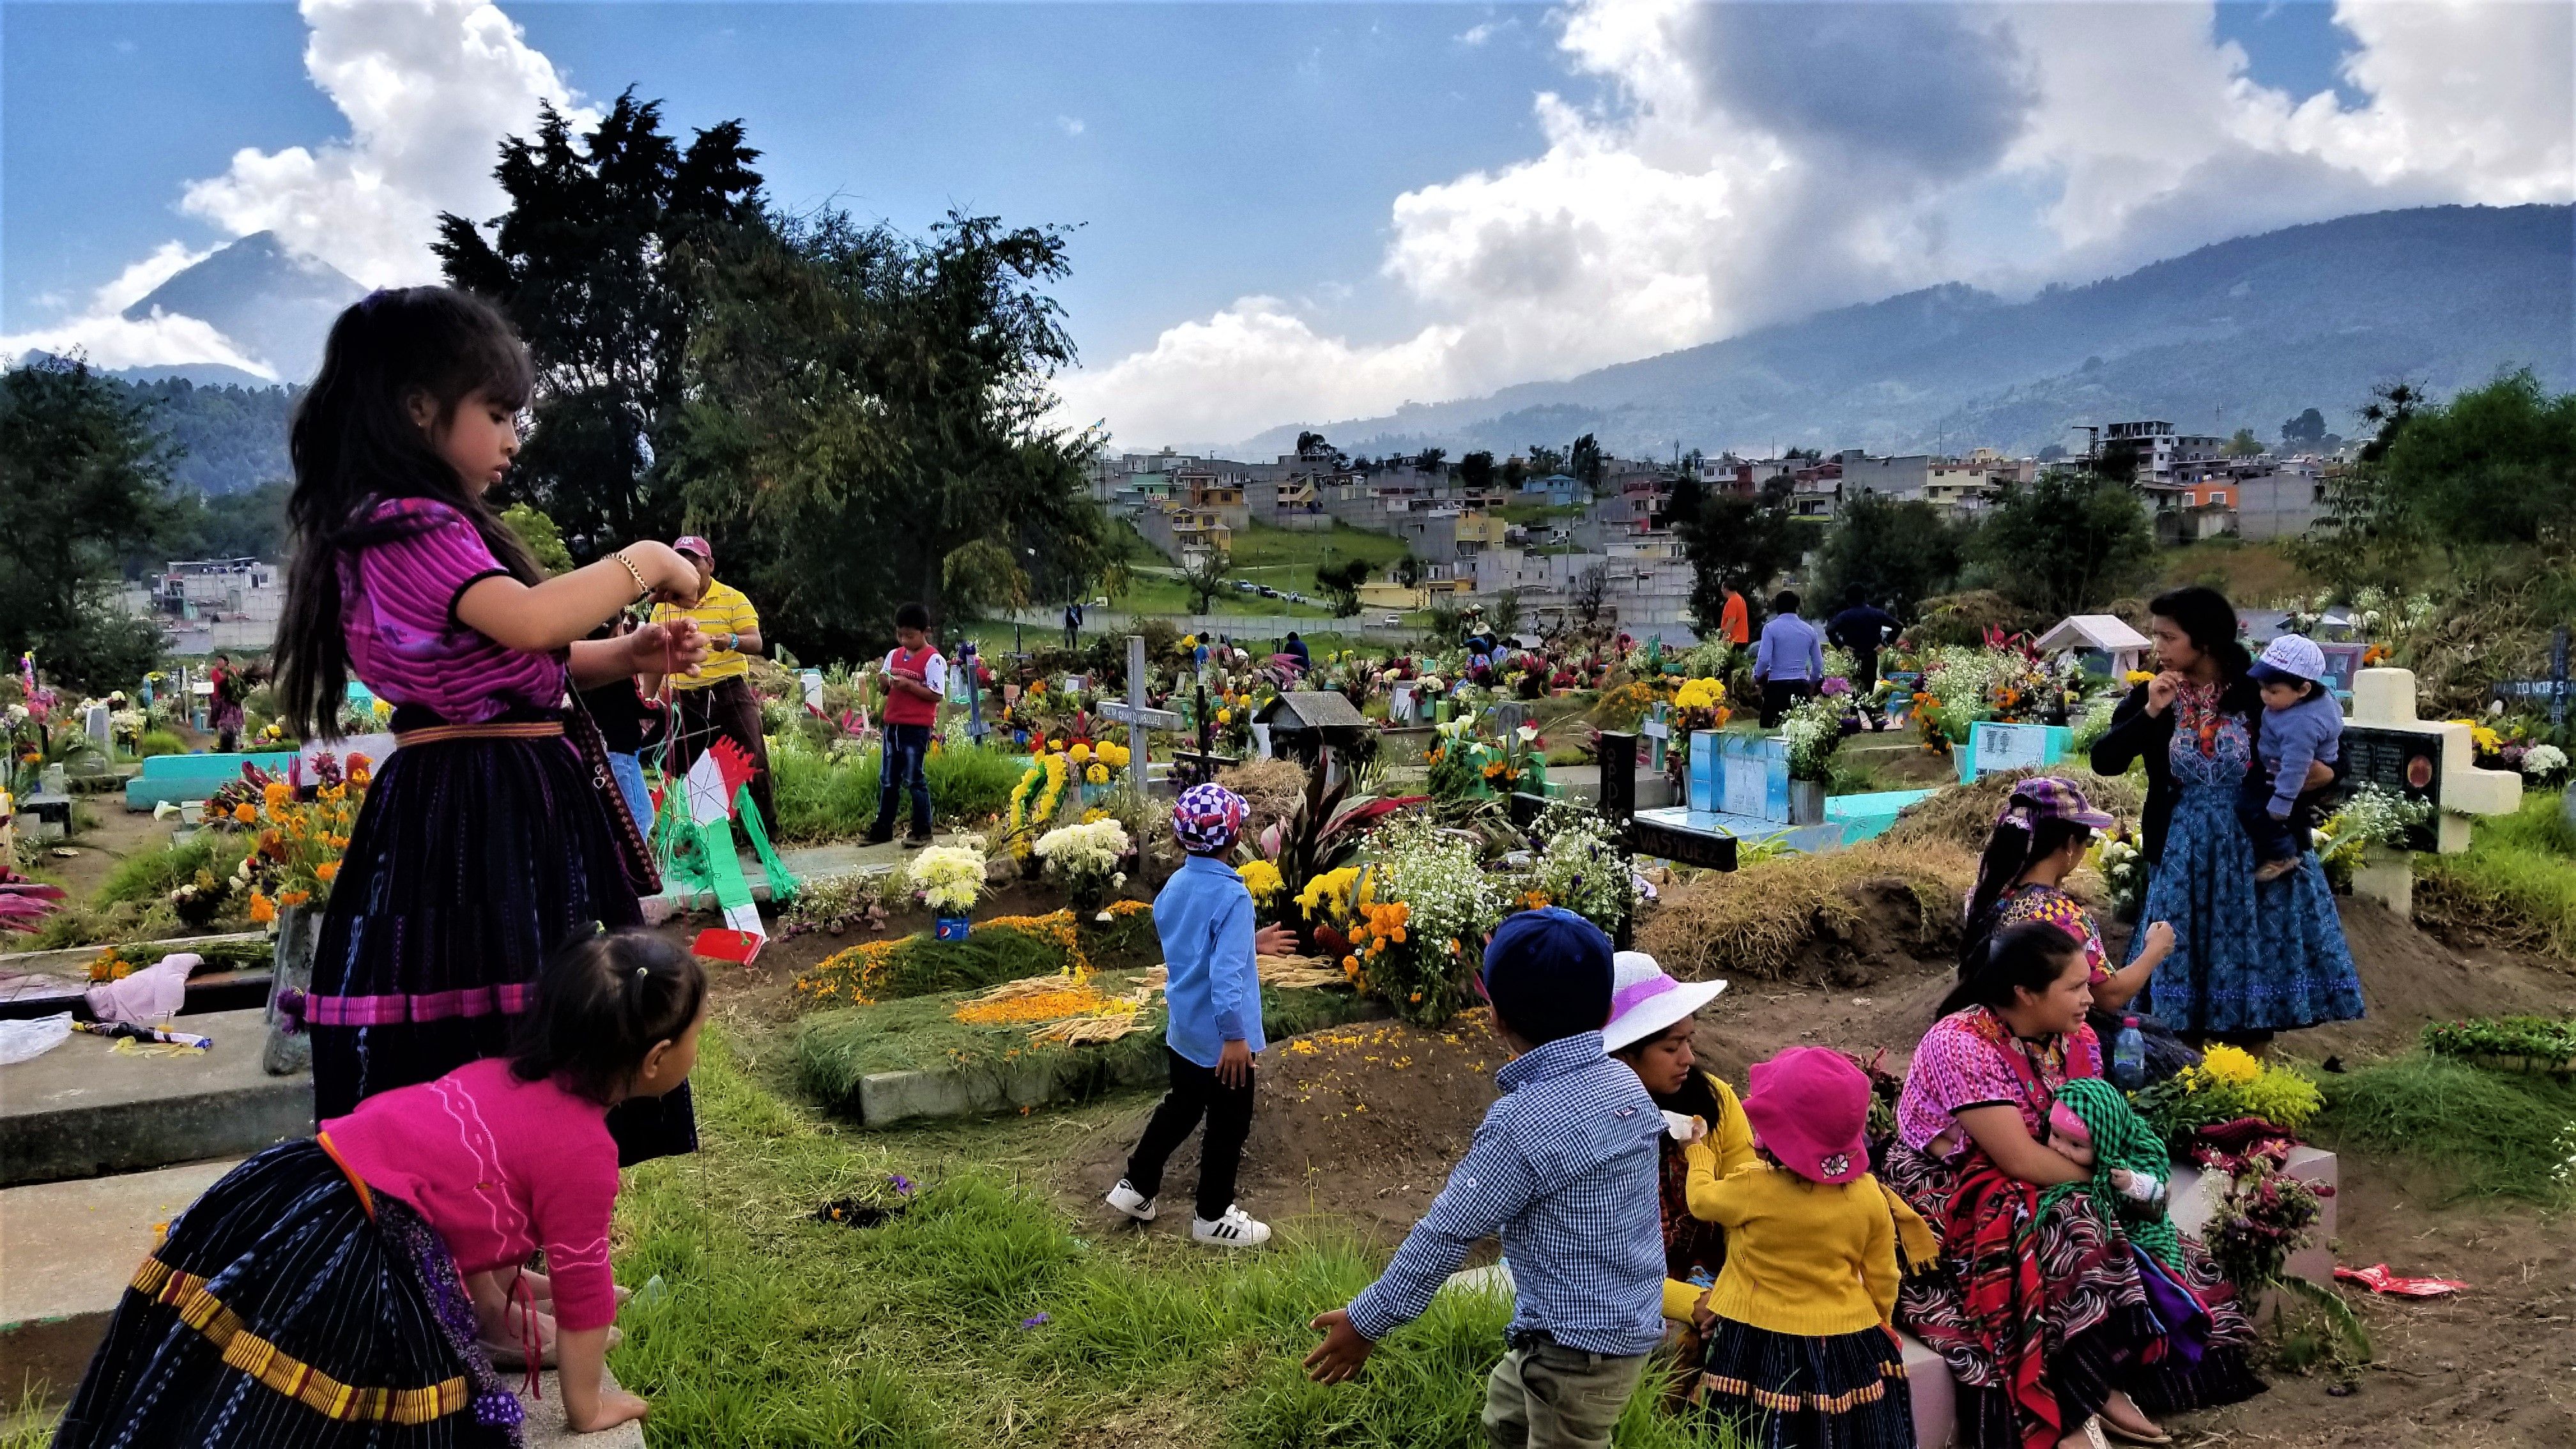 Cemeteries throughout Latin America, such as this one in Quetzaltenango, Guatemala, come to life when families decorate the graves of their loved ones with candles, fresh cut grass and flowers. For two days they pray, eat and remember their ancestors in honor of Day of the Dead. Image by Kristian Hernandez. Guatemala, 2018.